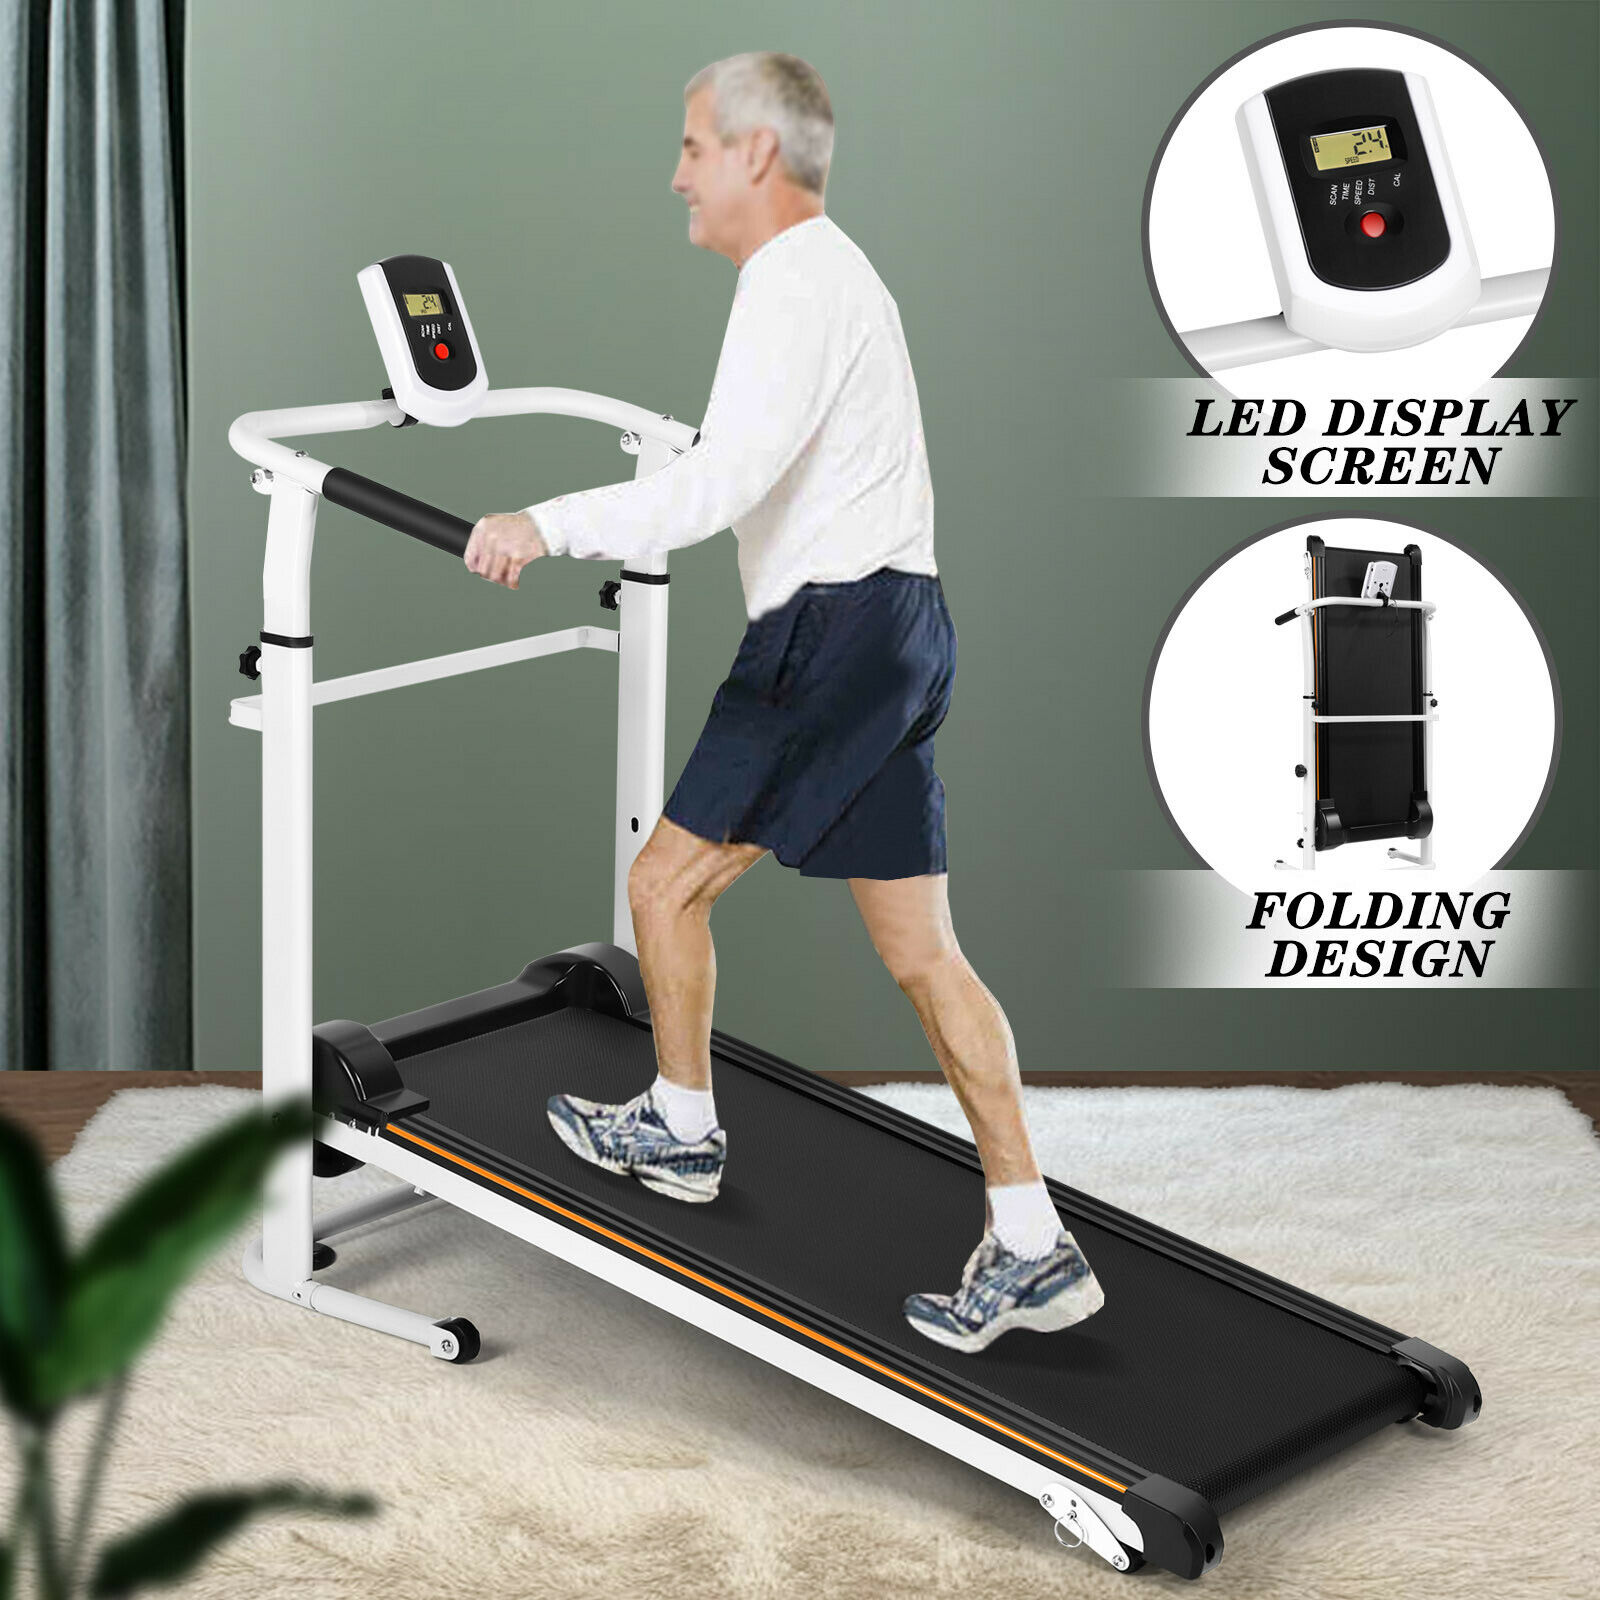 Folding Manual Treadmill Working Machine Cardio Fitness Exercise Incline Home